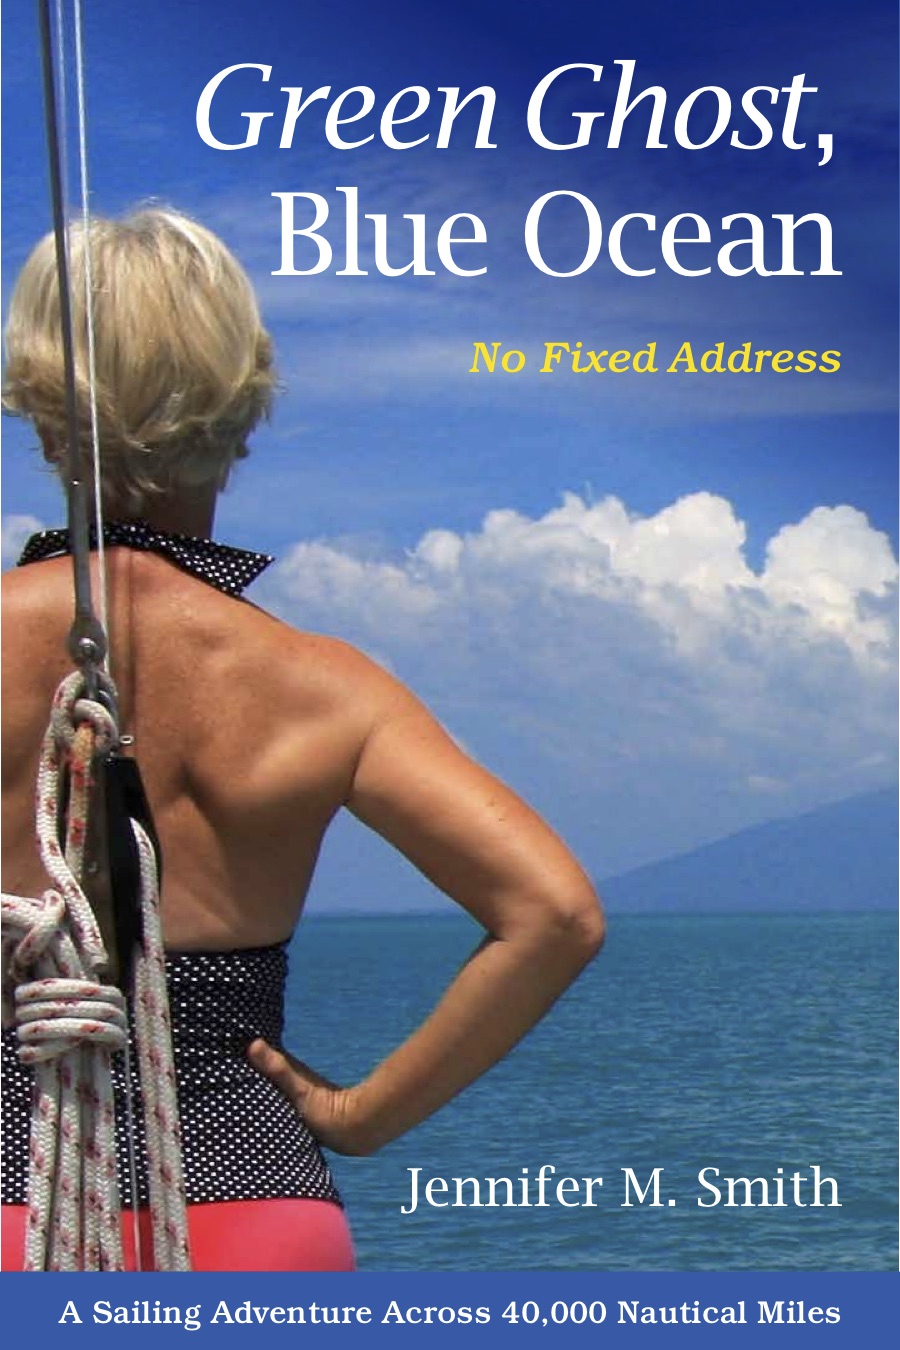 The cover of Jennifer's book entitled "Green Ghost, Blue Ocean,